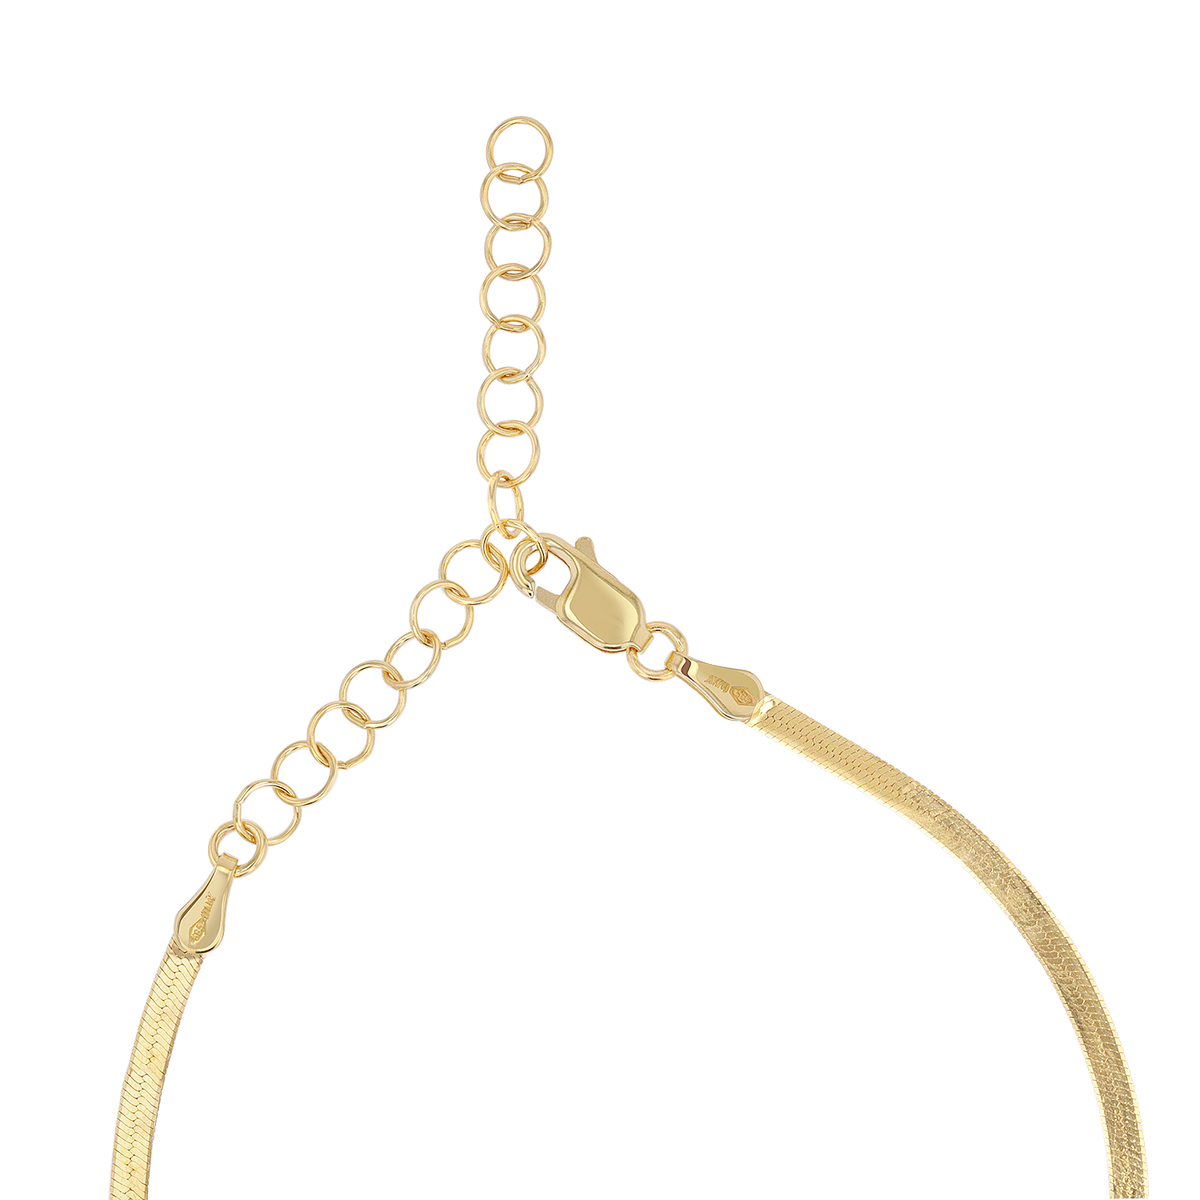 14K Gold Thin Herringbone Necklace 14K Yellow Gold / 18-20 Adjustable by Baby Gold - Shop Custom Gold Jewelry